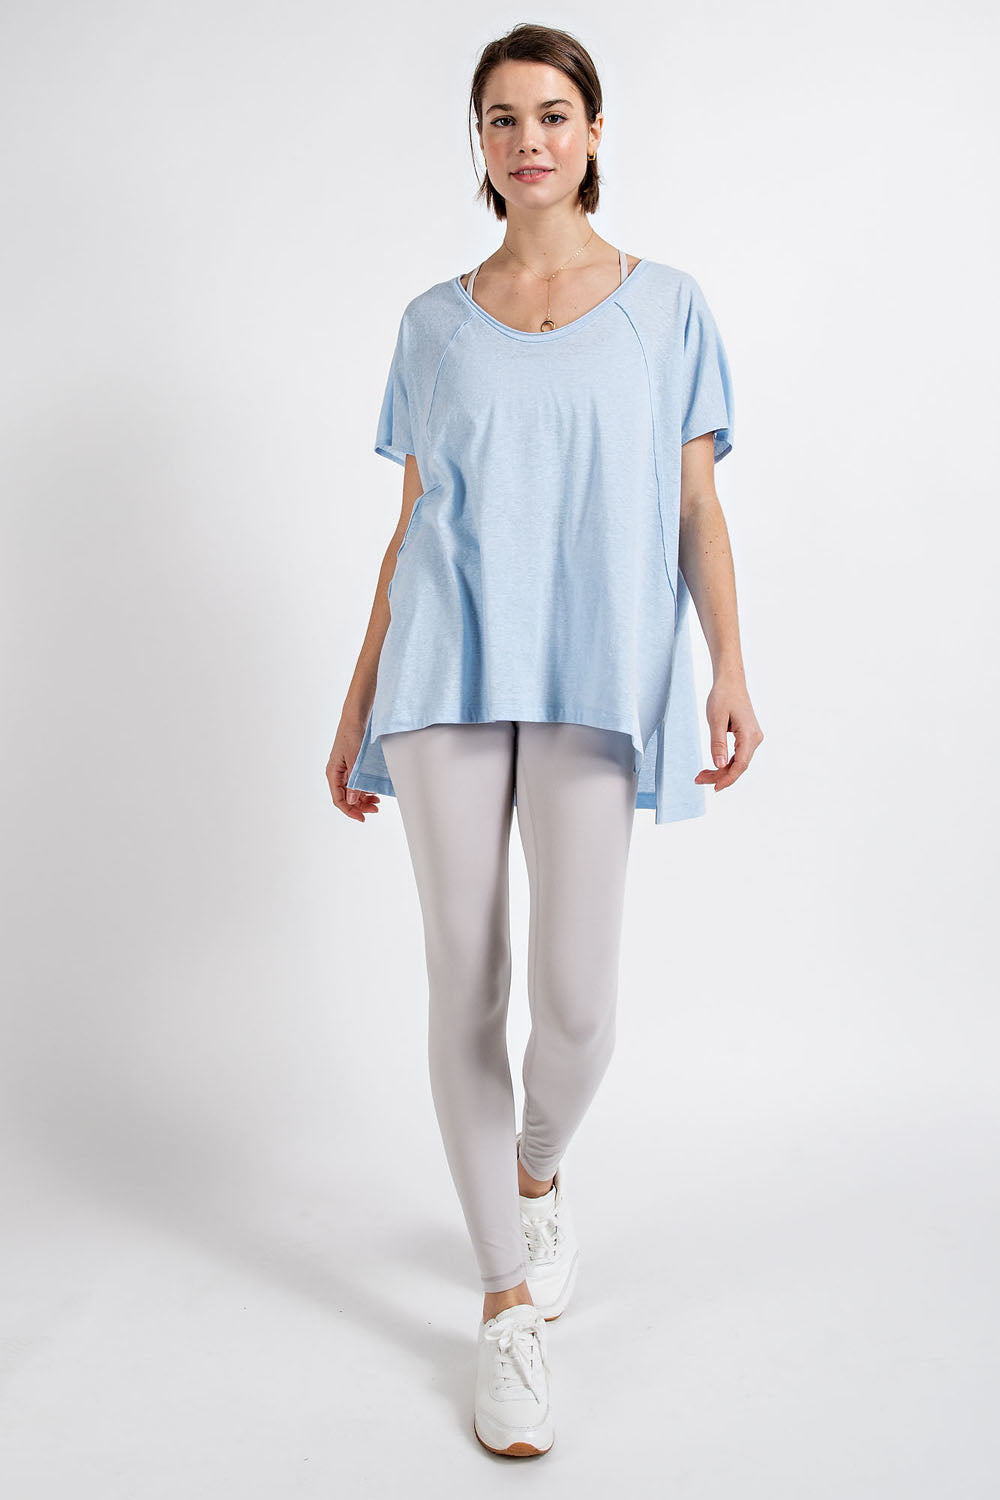 The Rae Tunic Top - Discontinued Colors